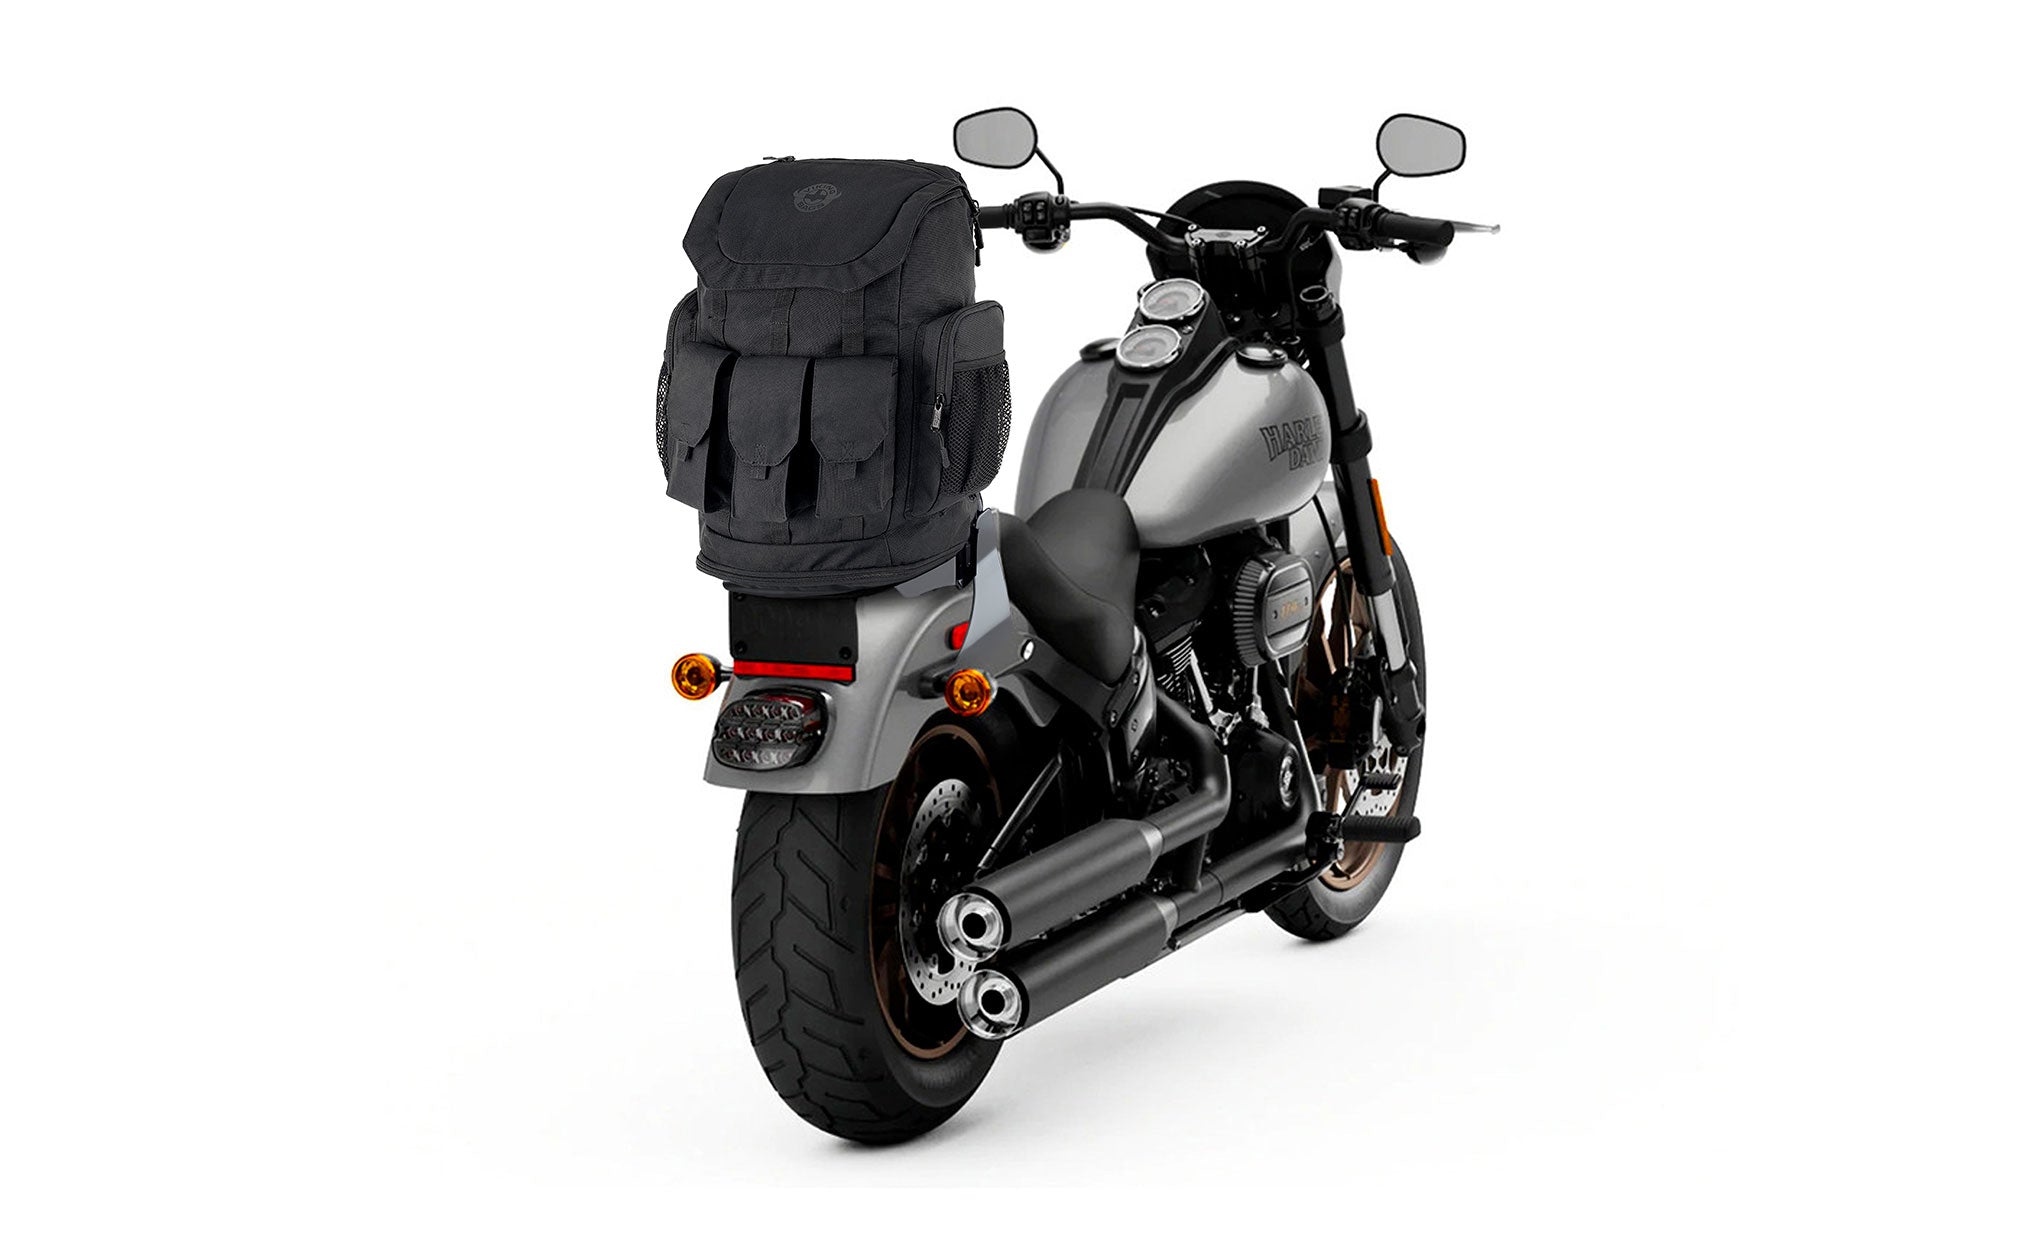 Viking Trident XL Hyosung Motorcycle Backpack Bag on Bike View @expand